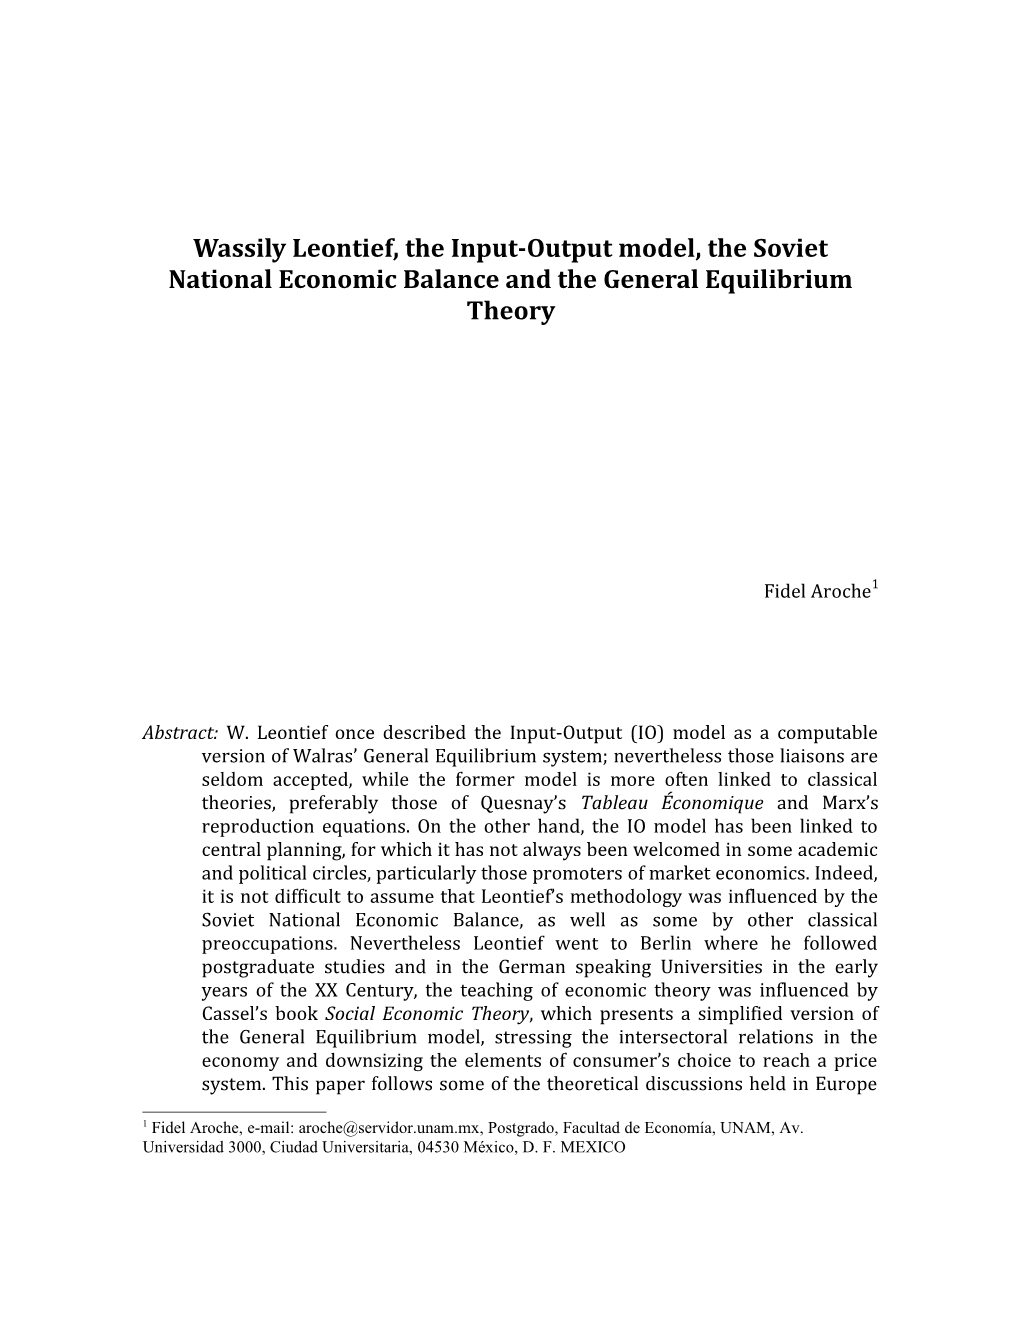 Wassily Leontief and the General Equilibrium Theory